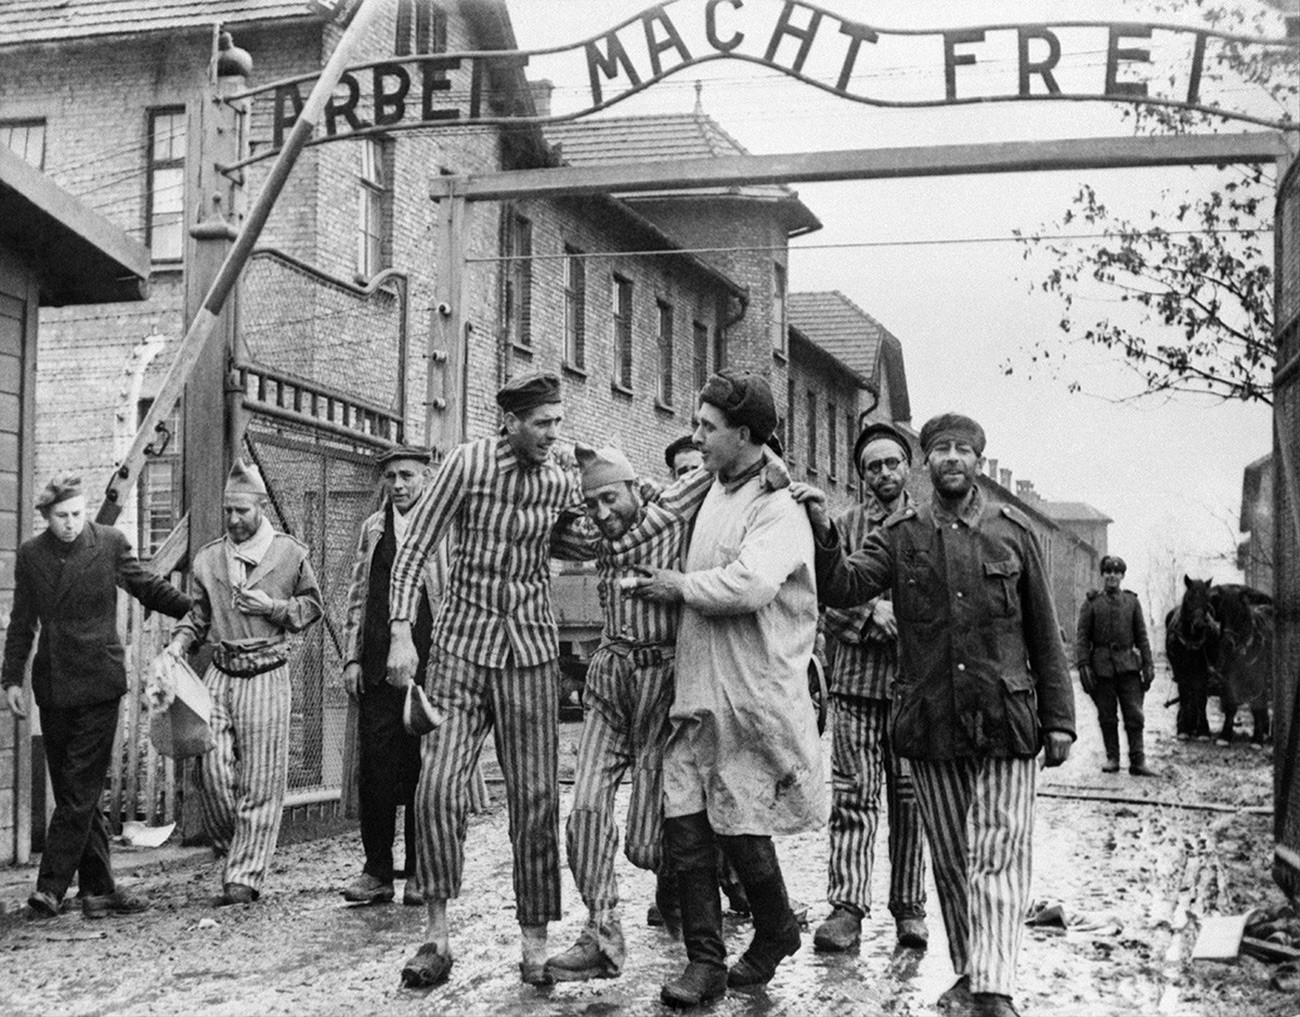 Liberated by the Soviet army, prisoners exit the labor camp Auschwitz-Birkenau, 1945